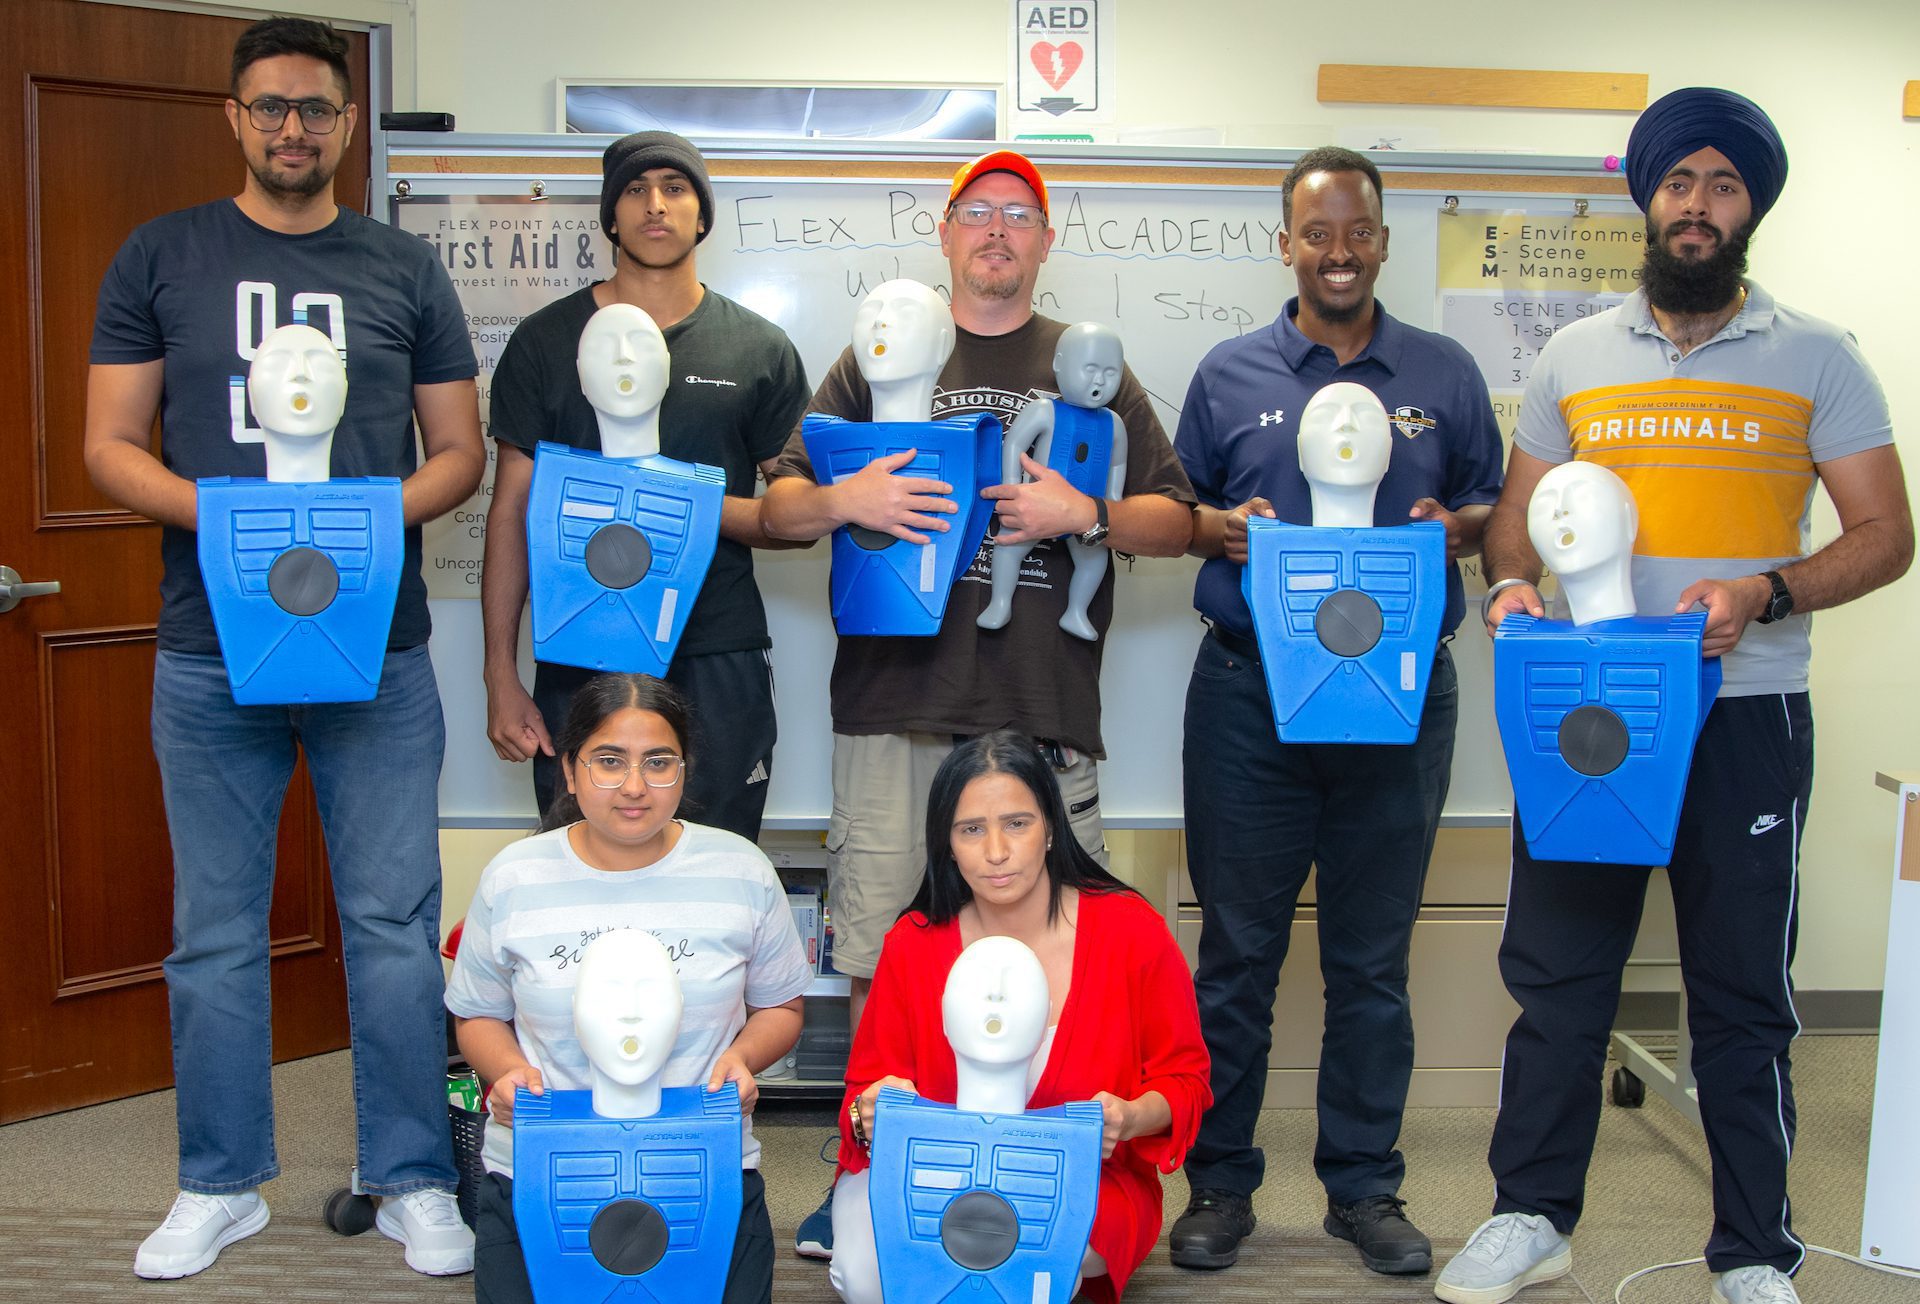 First Aid and CPR training trainees standing and hold their blue dummy/mannequin that was used for training